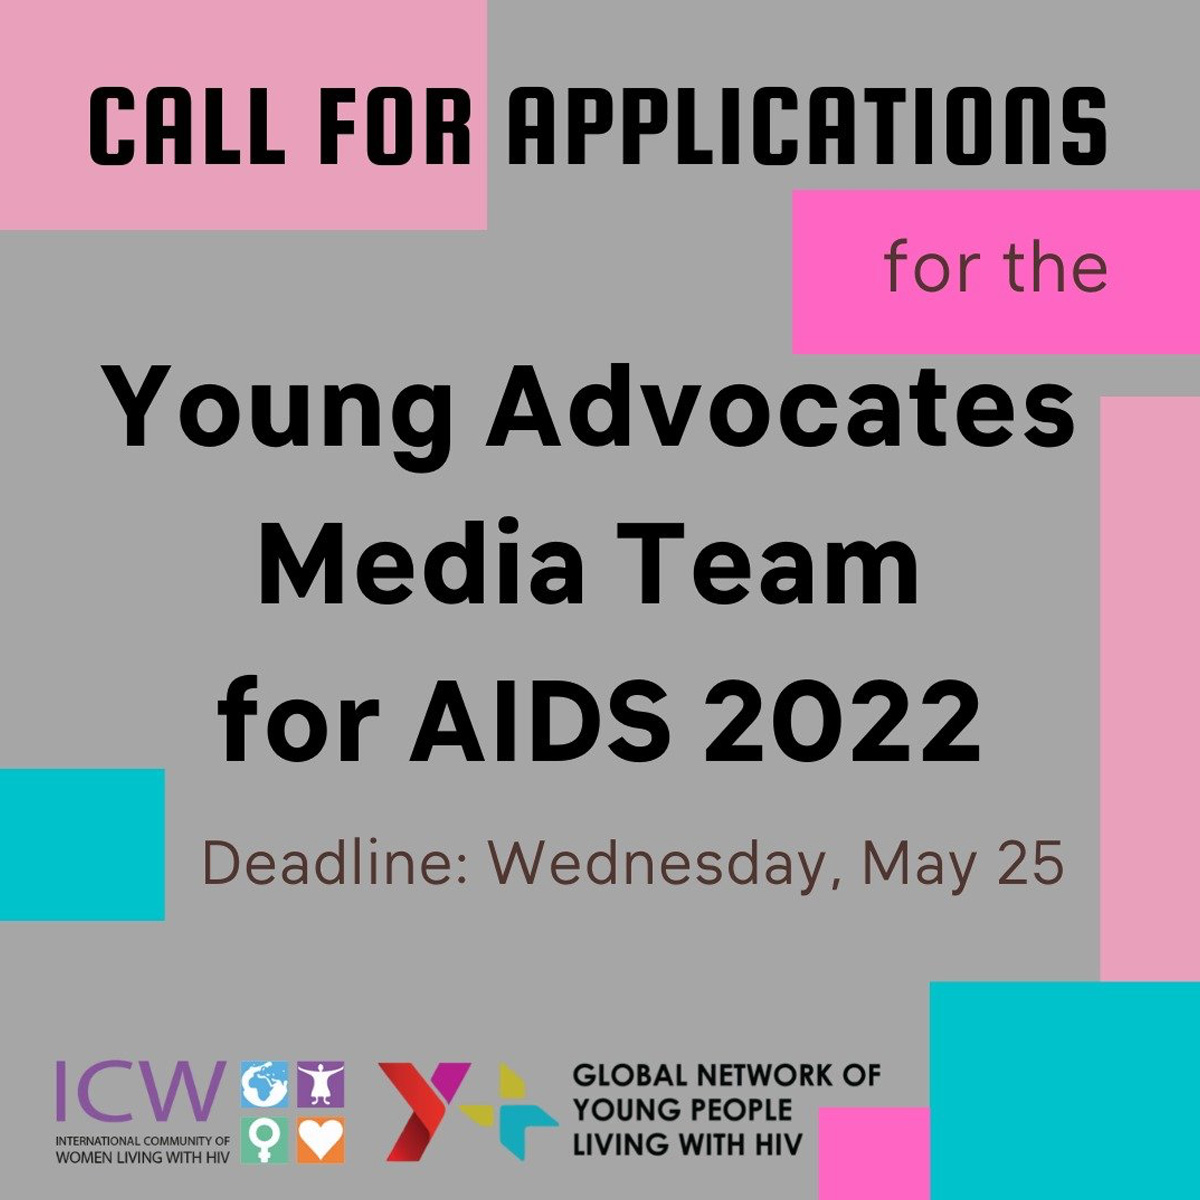 Call for Applications for the Young Advocates Media Team for AIDS 2022